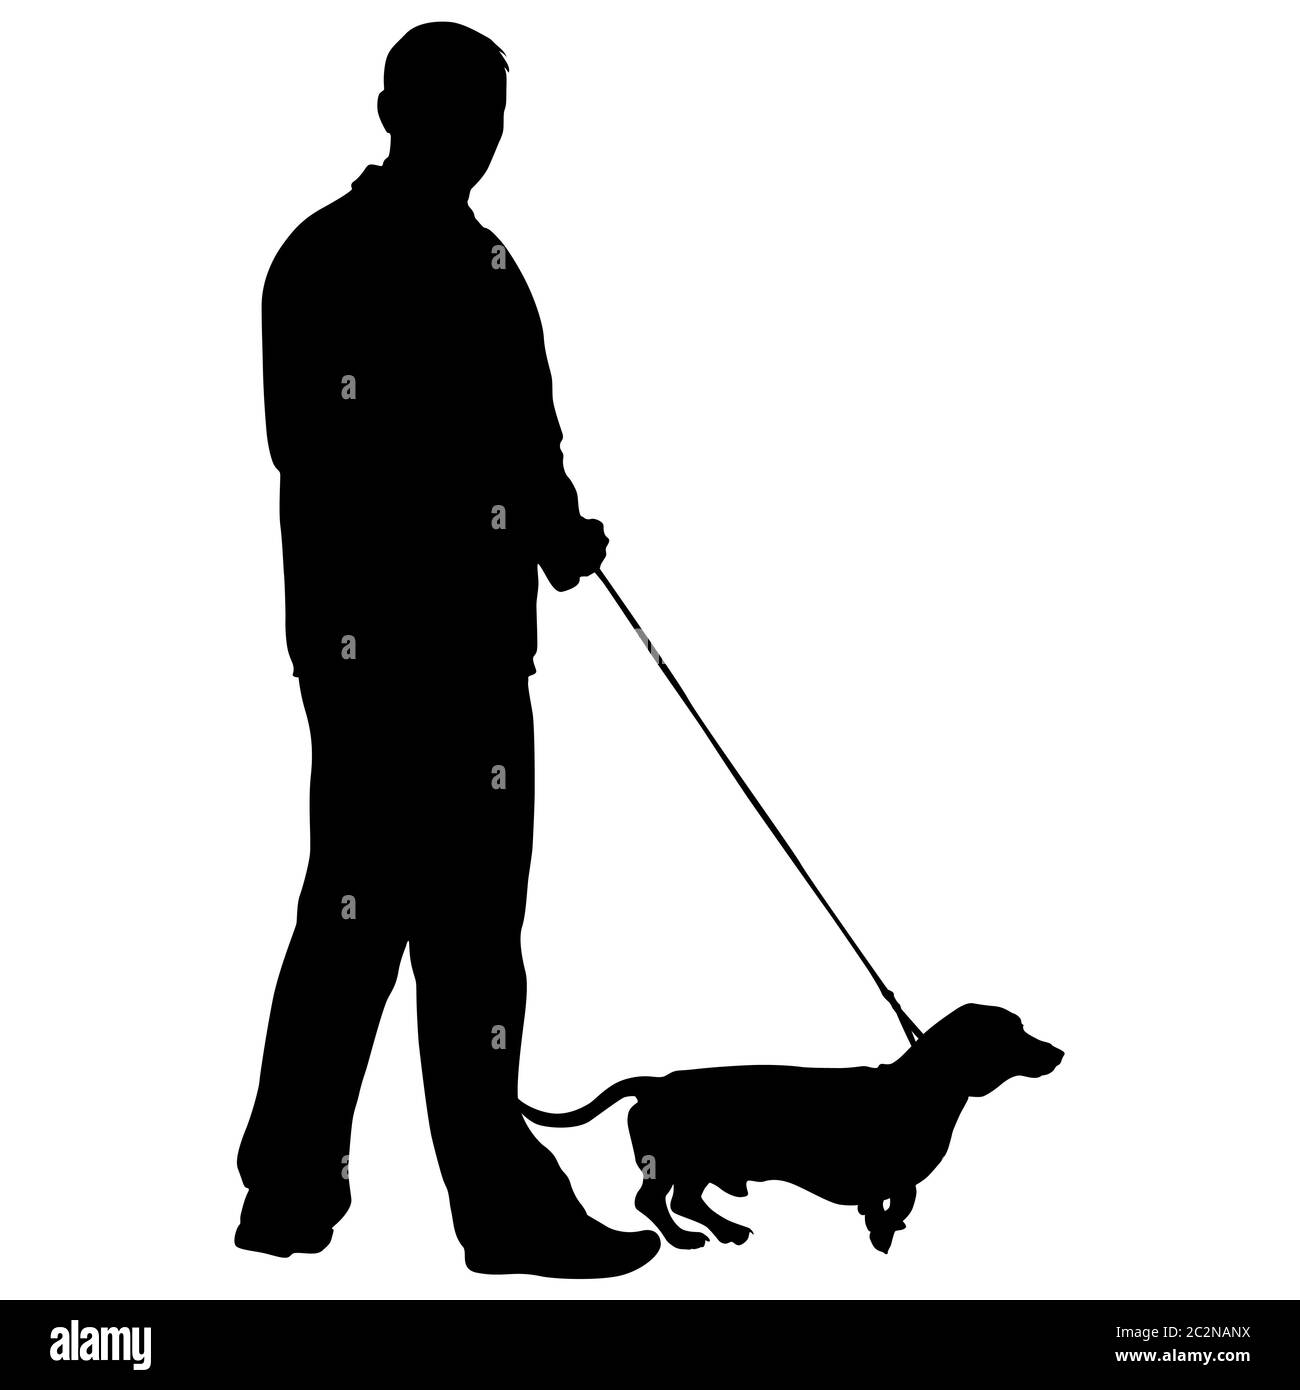 Silhouette of people and dog. Vector illustration Stock Photo